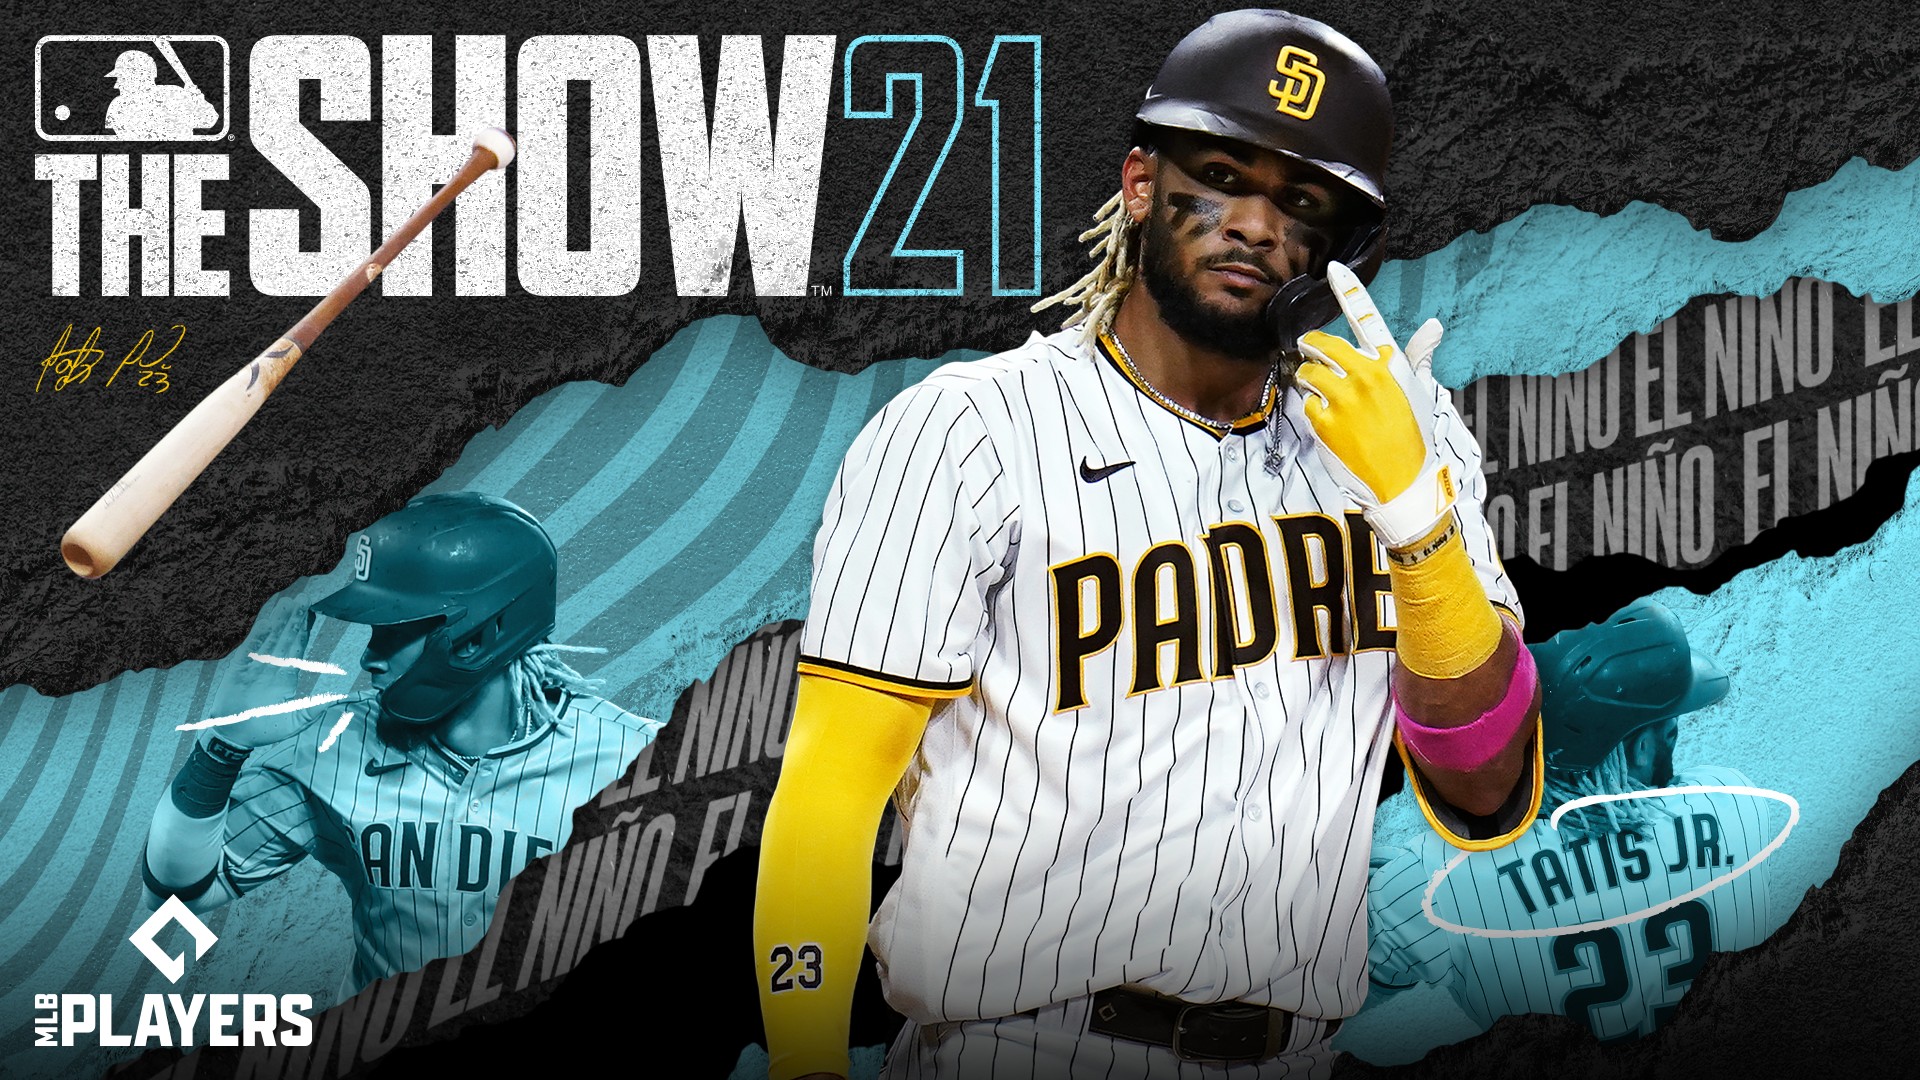 Video For MLB The Show 21 is Available Now on Xbox One, Xbox Series X|S, and Xbox Game Pass